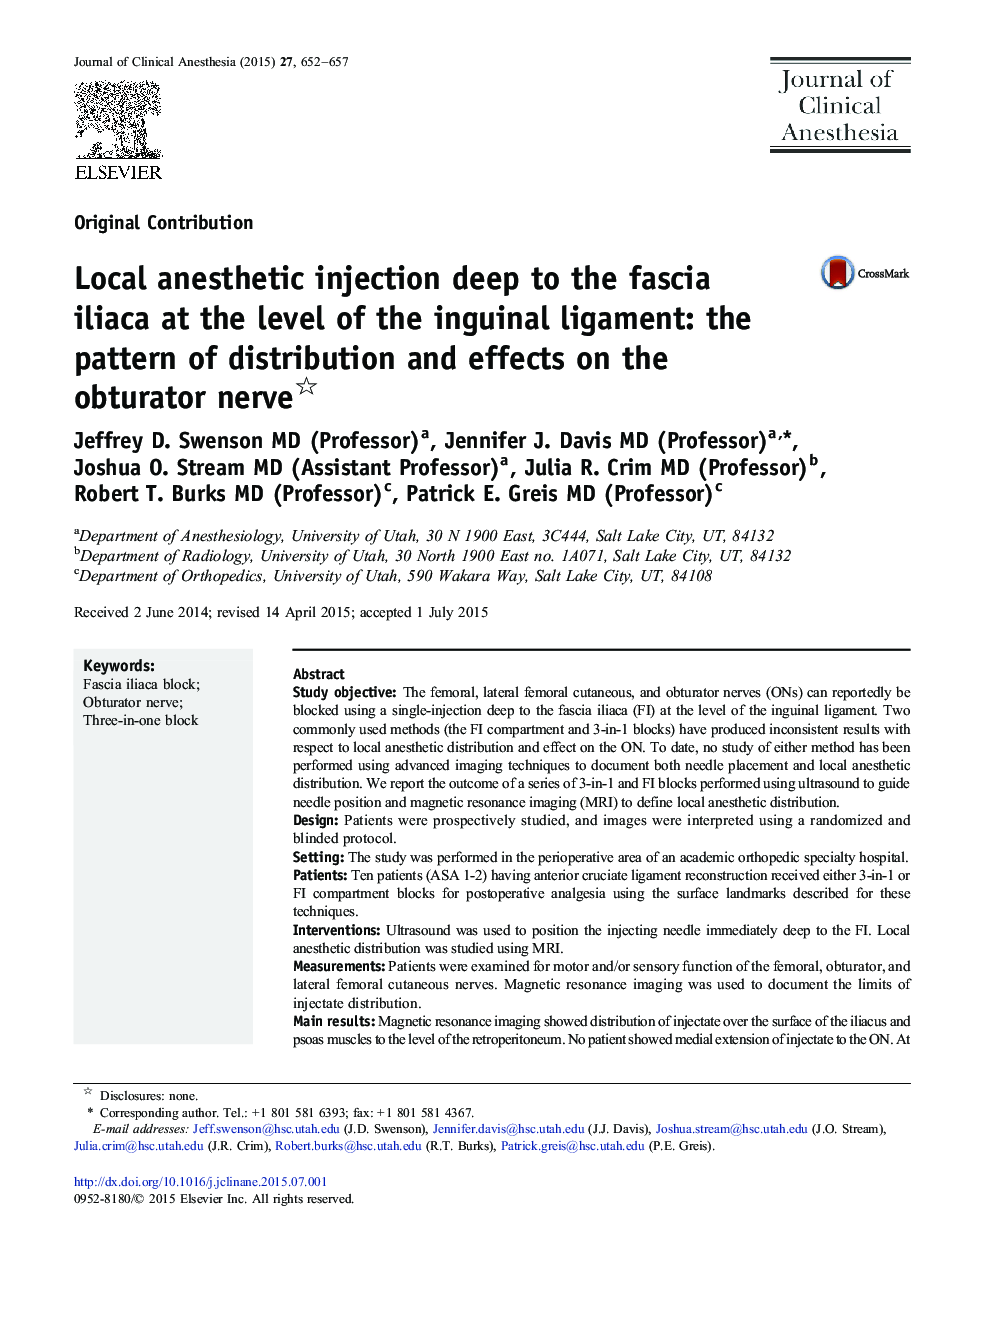 Local anesthetic injection deep to the fascia iliaca at the level of the inguinal ligament: the pattern of distribution and effects on the obturator nerve 